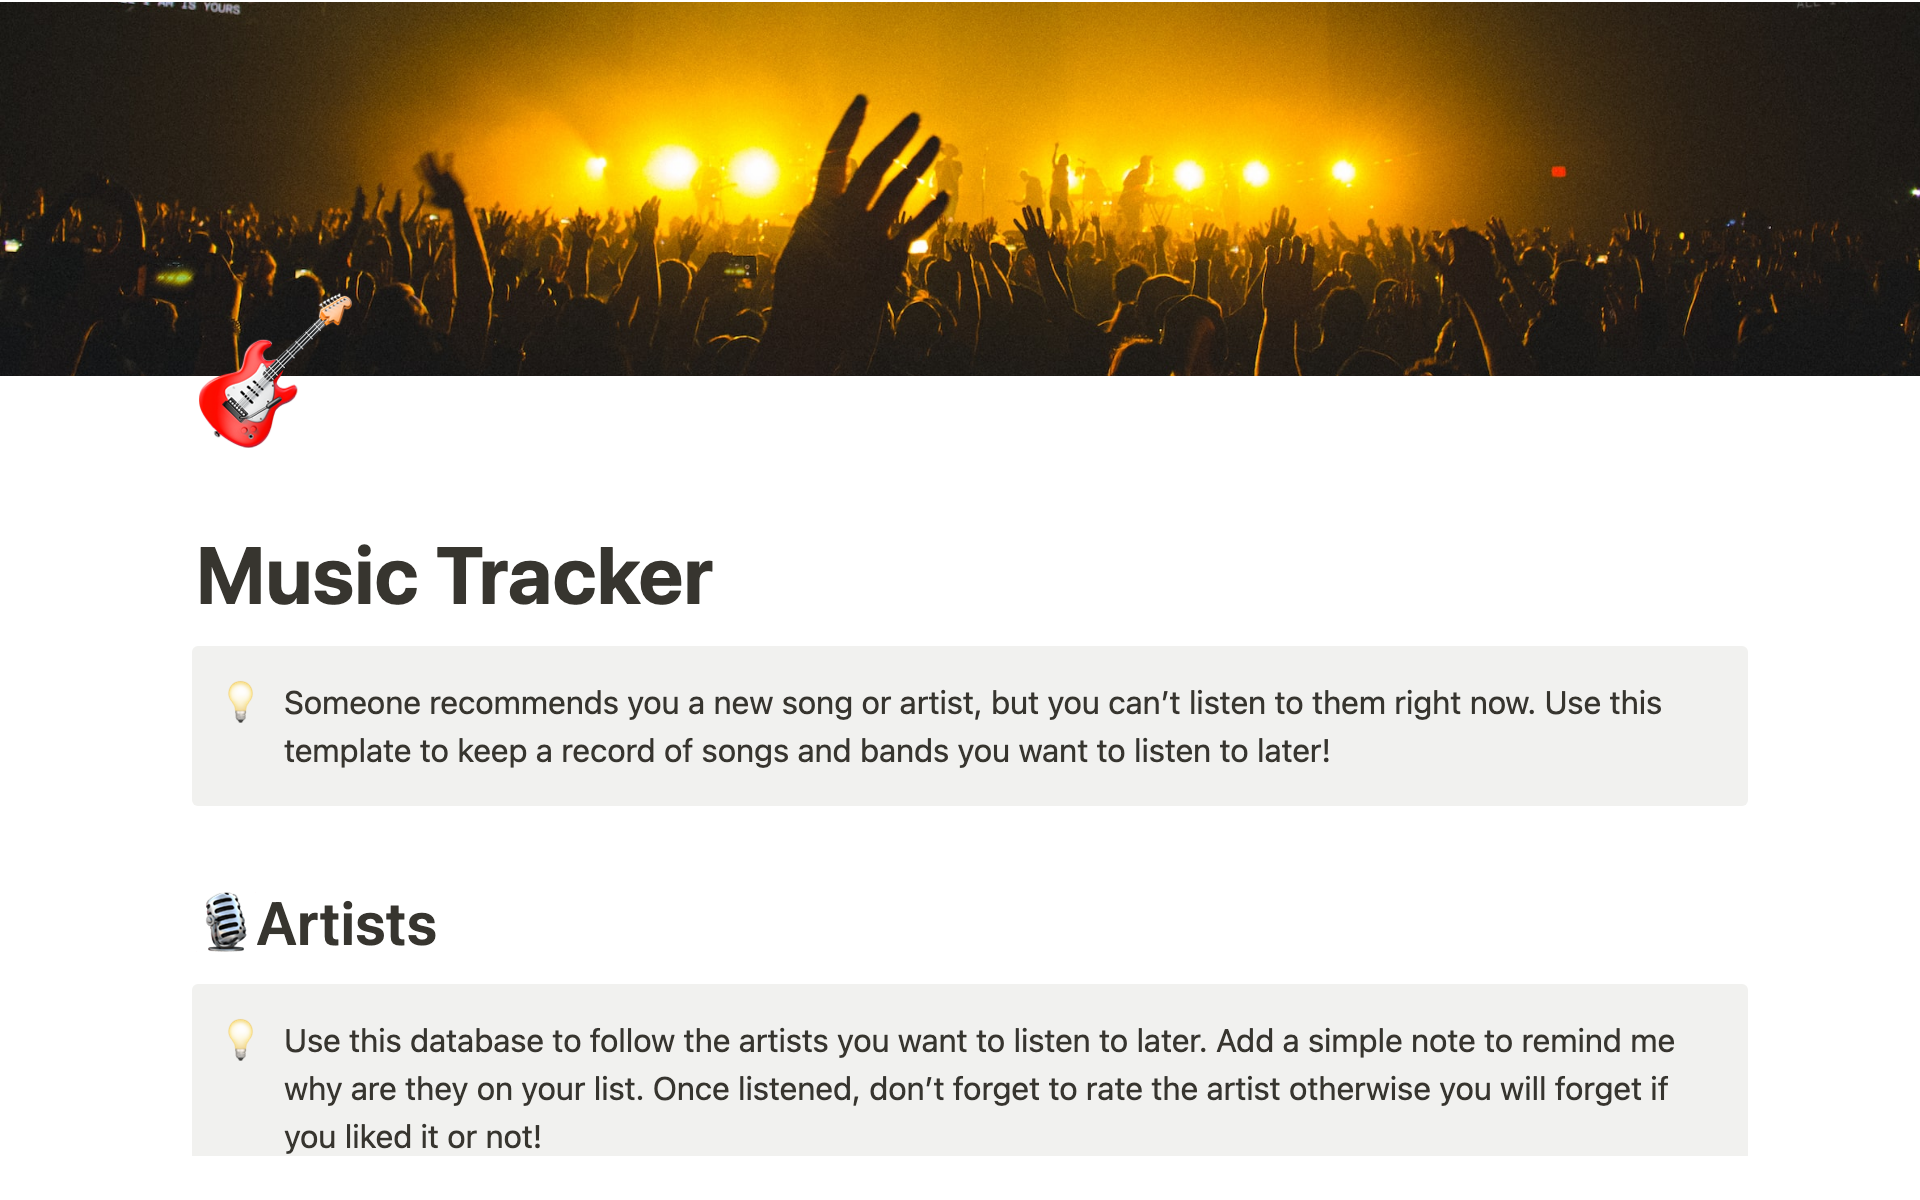 Allows to track artists or bands you want to listen to later